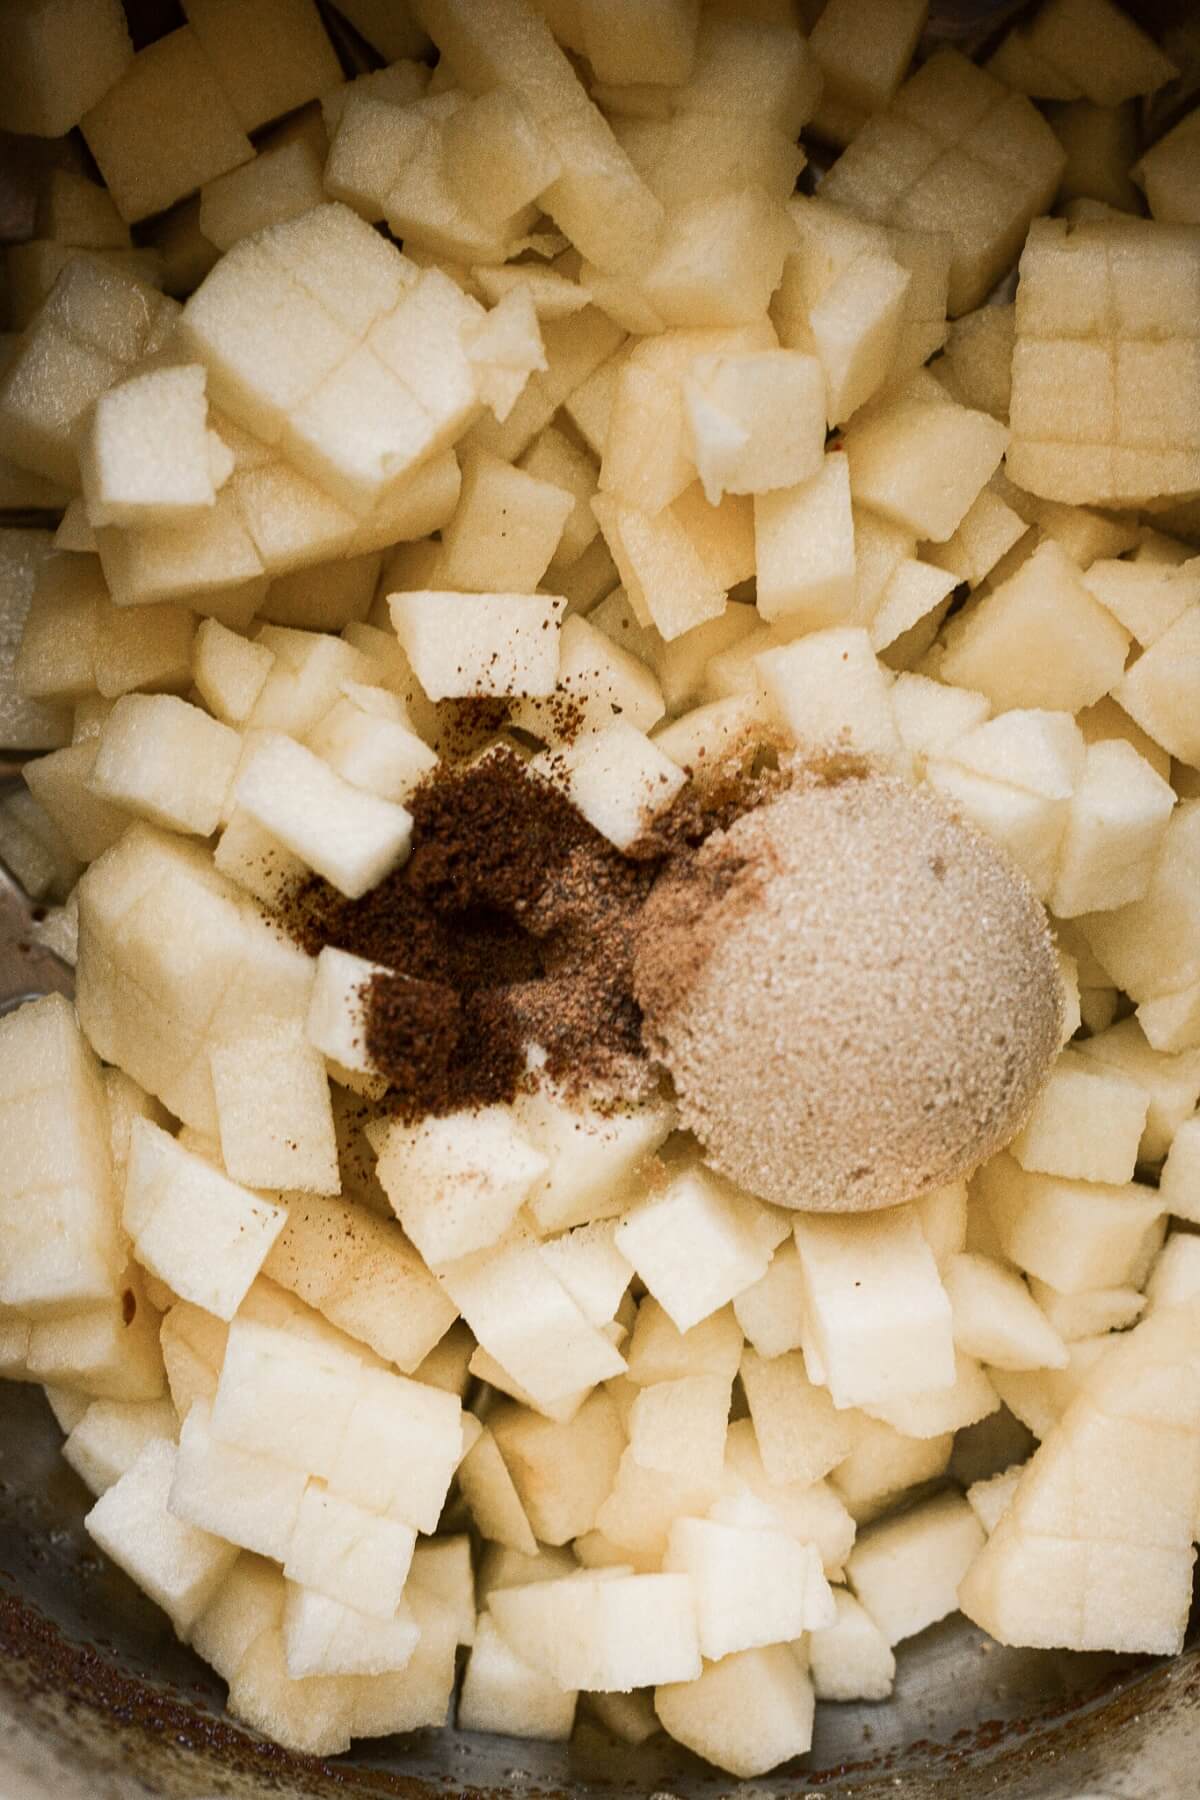 Brown sugar and spices on chopped apples.